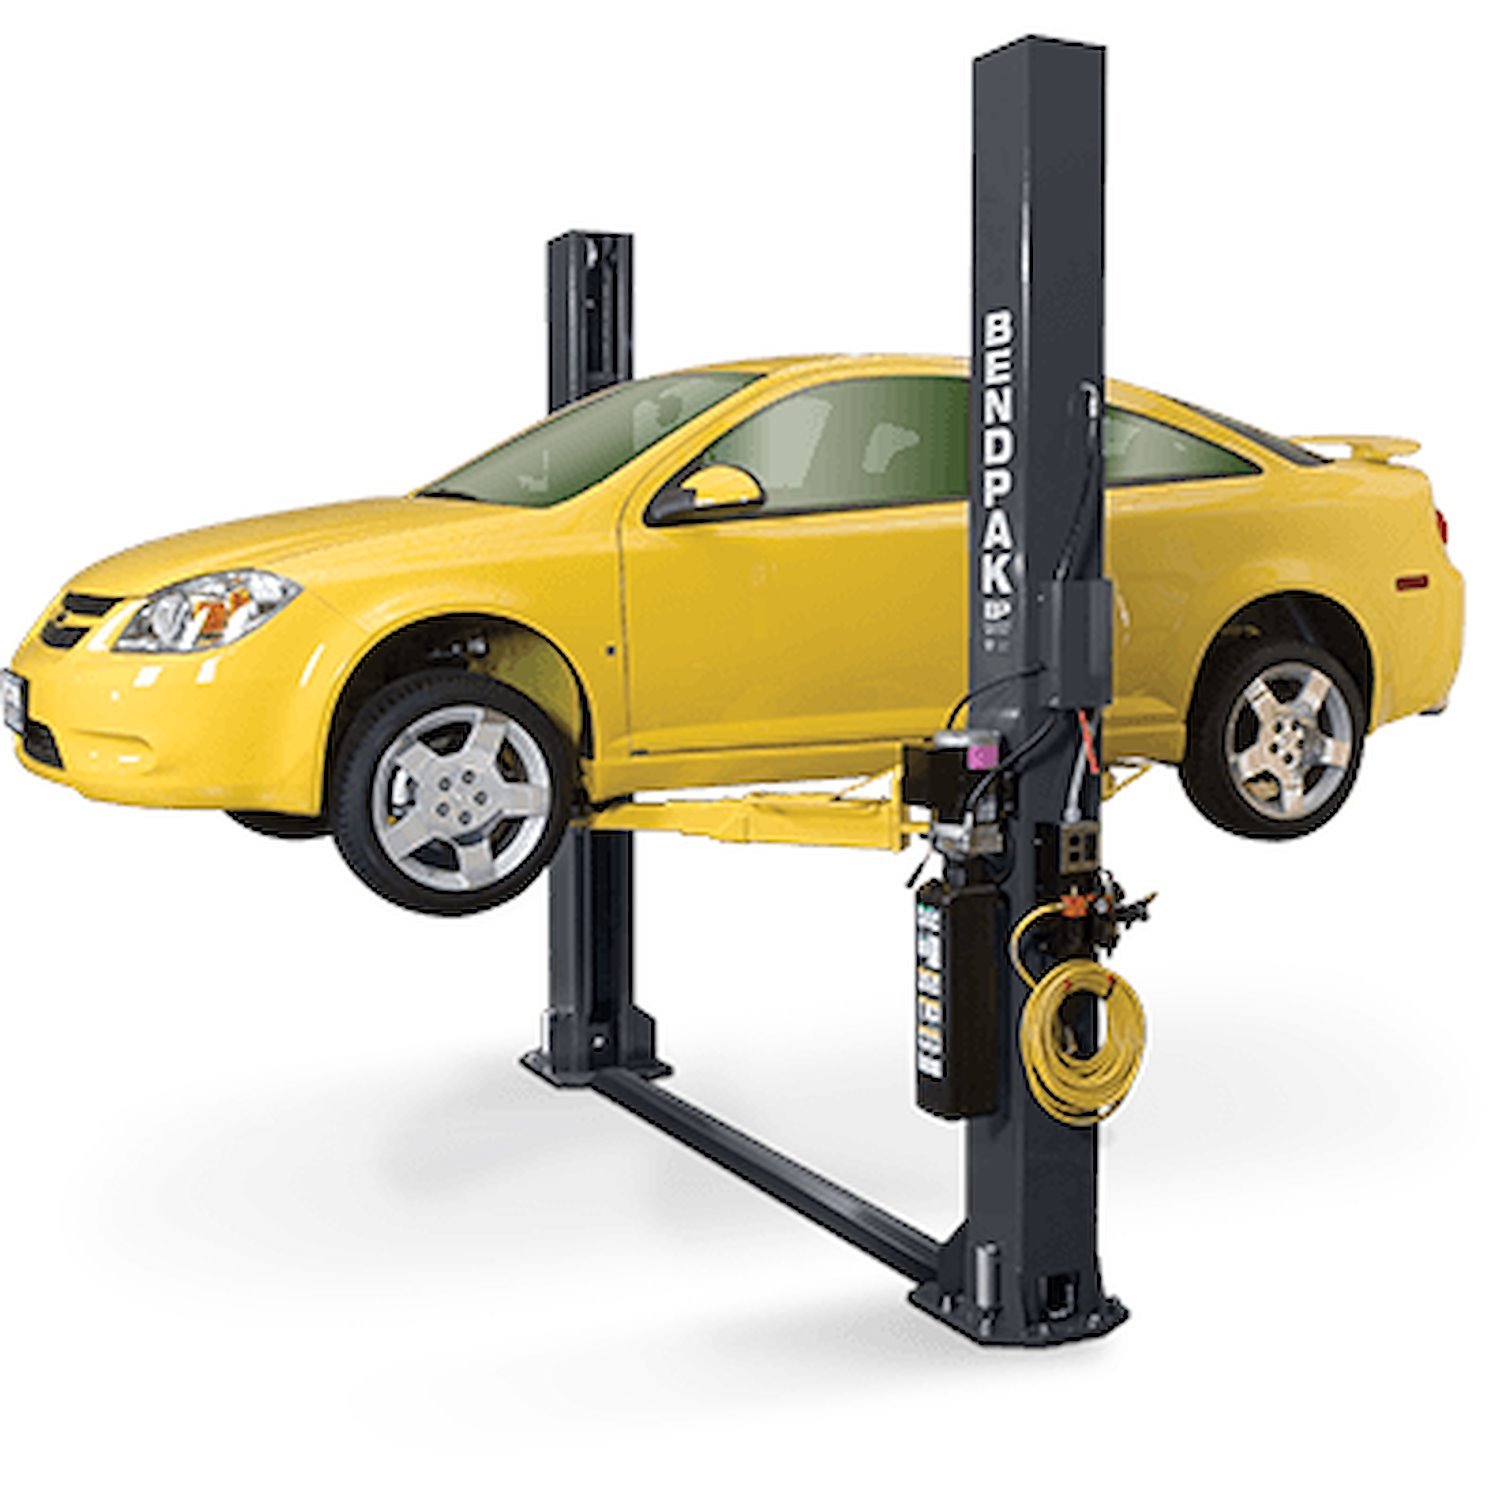 XPR-9S Two-Post Lift, 9,000-lb. Capacity